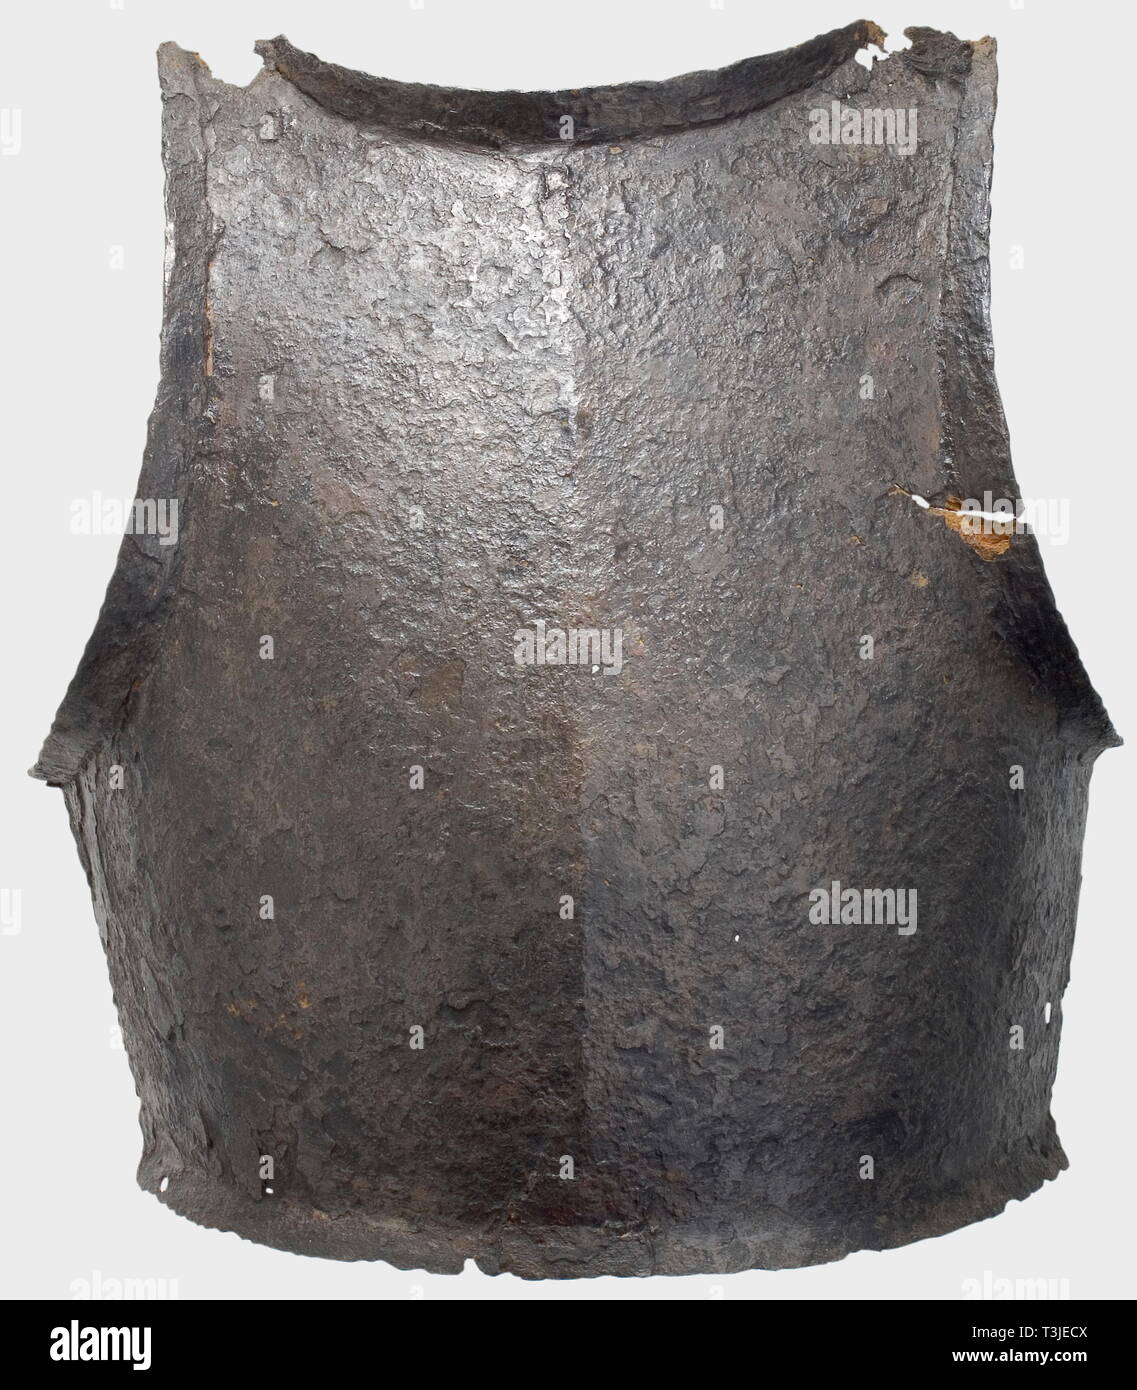 A breastplate for a suit of armour, presumably Italian, circa 1500 An iron breastplate forged in one piece with a central ridge over its entire height, and narrow flanges at the neck and arm cutouts. narrow, angular rims. Corroded, restored, damaged. Height 35 cm. Weight 1172 g. Cf. Karchewski Jr./Thom Richardson, Medieval Armour from Rhodes, Breastplate 4.92, p. 73, also the photo from circa 1910/20 of a show case at the Parisian Art Dealers, Victor and Louis Bacherau containing pieces of armour from Rhodes, Fig. 10, p. xiii. historic, historica, Additional-Rights-Clearance-Info-Not-Available Stock Photo